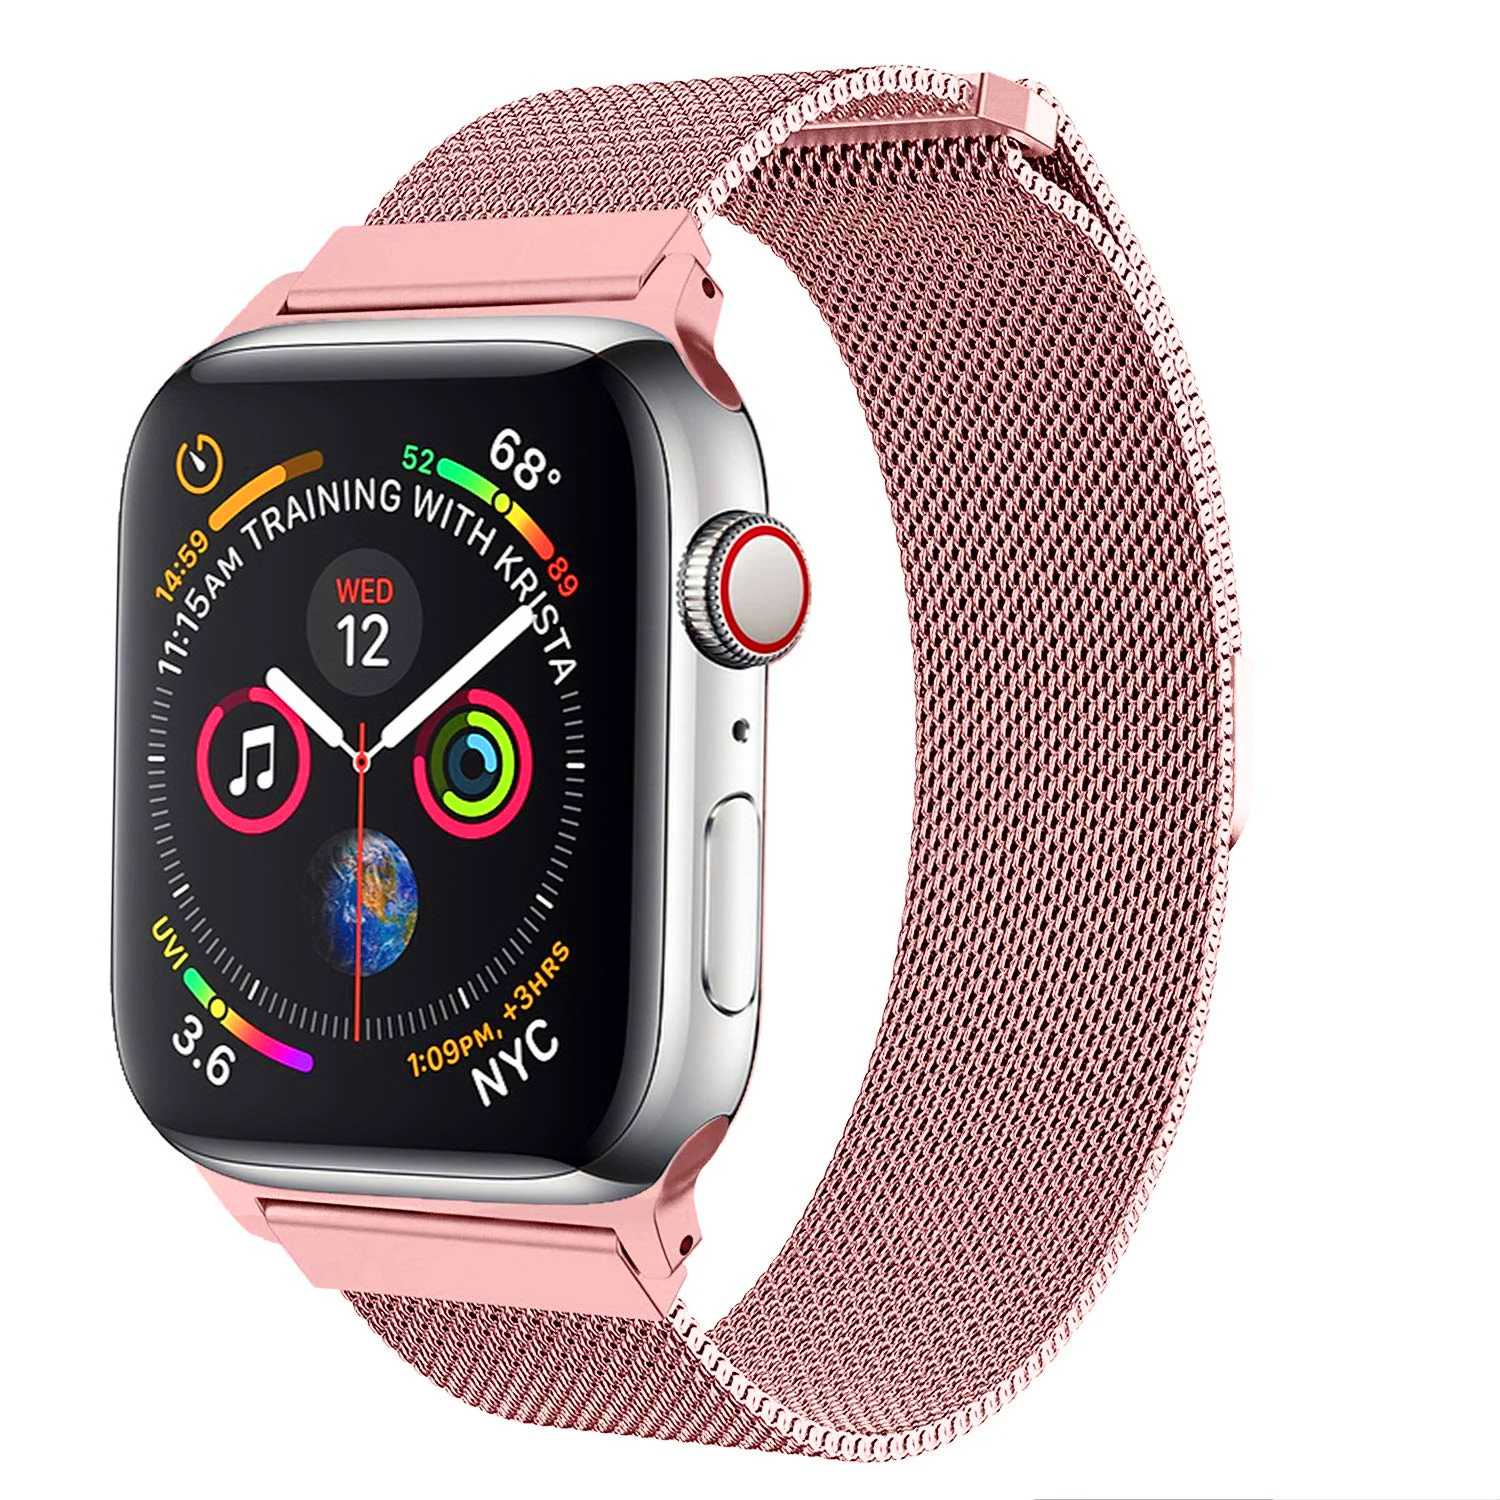 

ShanHai For Watch Band 38mm 40mm 42mm 44mm, Stainless Steel Mesh Band with Adjustable Magnetic Closure for iWatch Series 5 4 3, Multi-color optional or customized